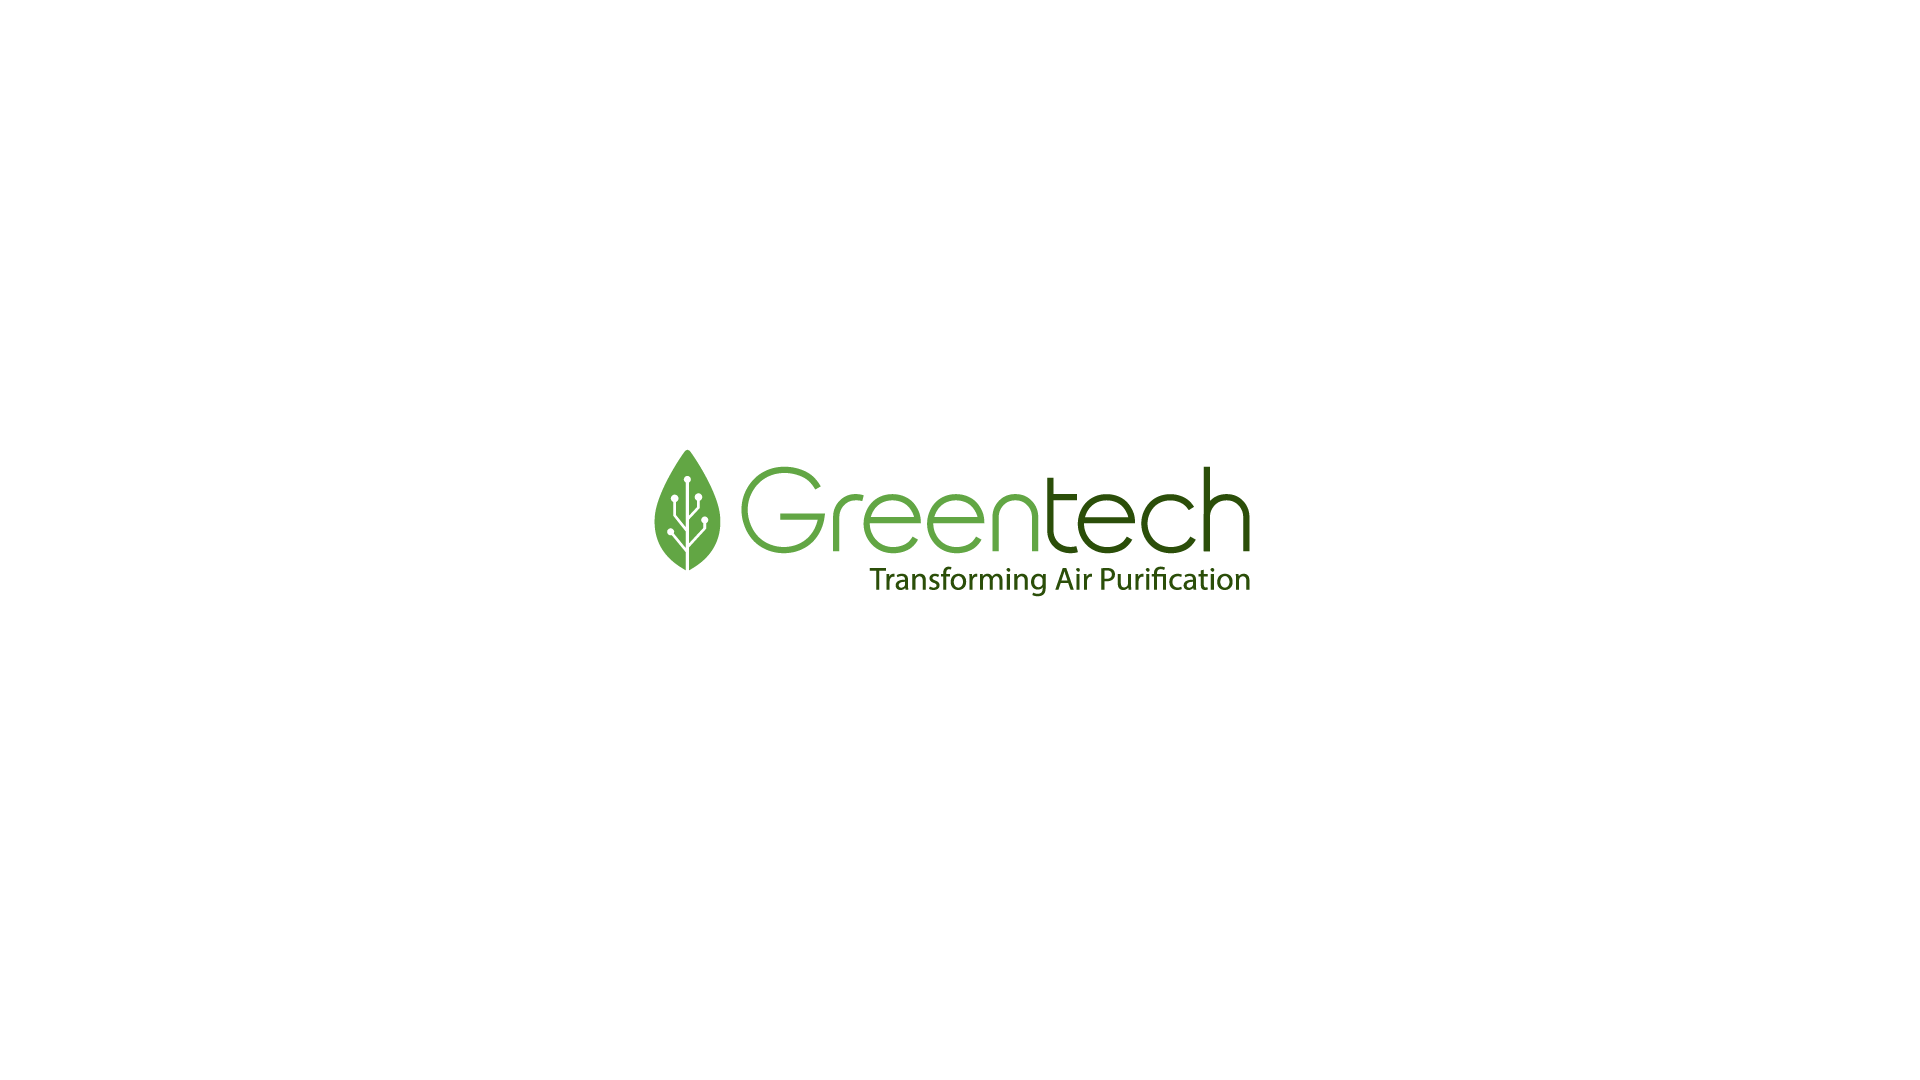 Load video: Allen Johnston, Founder and CEO of GreenTech Environmental discusses his personal history and how his story led him to start Greentech and continues to guide it&#39;s path today.